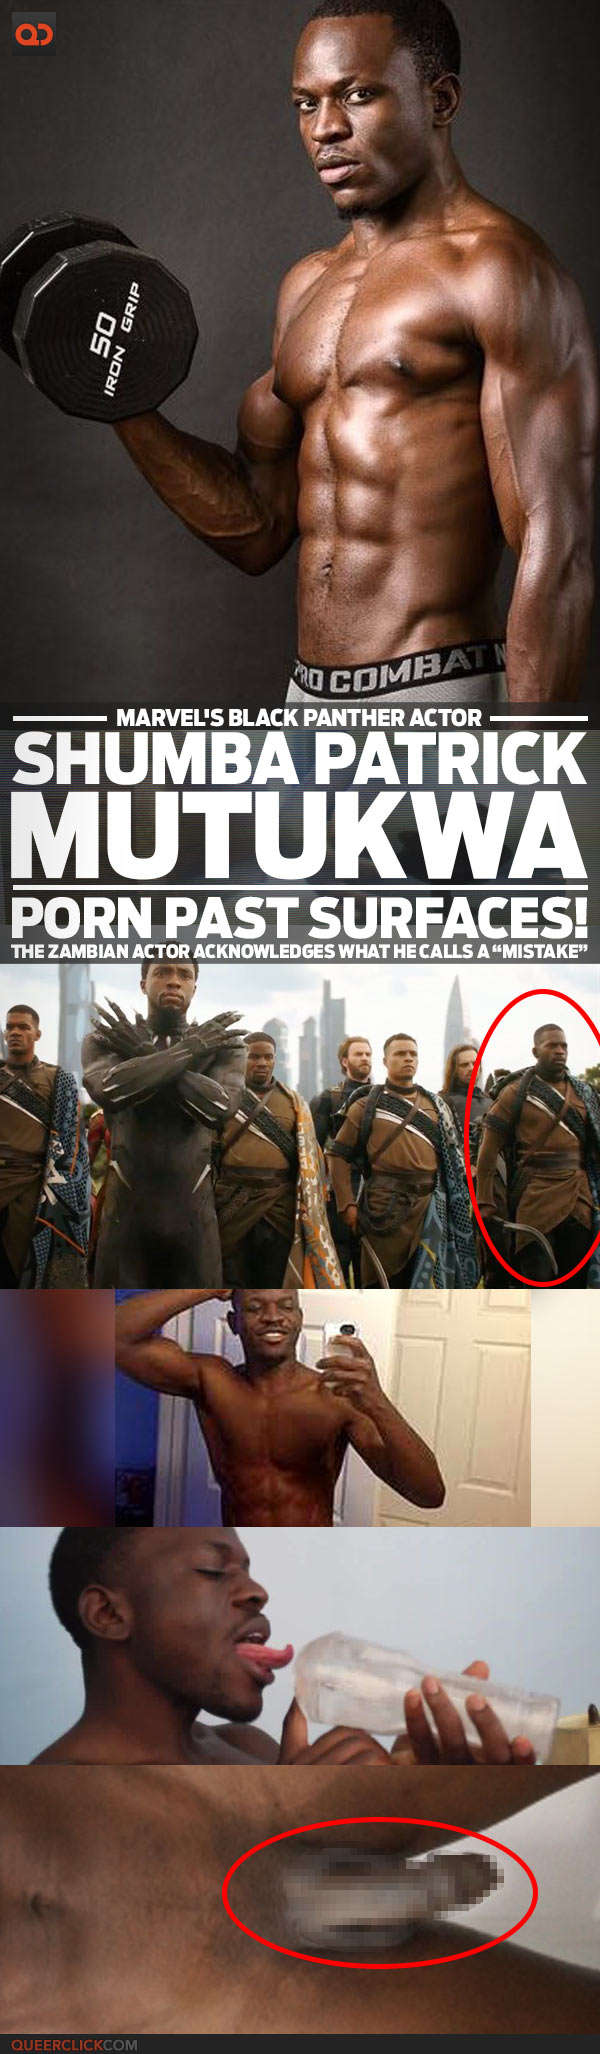 600px x 2054px - Shumba Patrick Mutukwa, Marvel's Black Panther Actor, Porn Past Surfaces! -  The Zambian Actor Acknowledges What He Calls A â€œMistakeâ€ - QueerClick